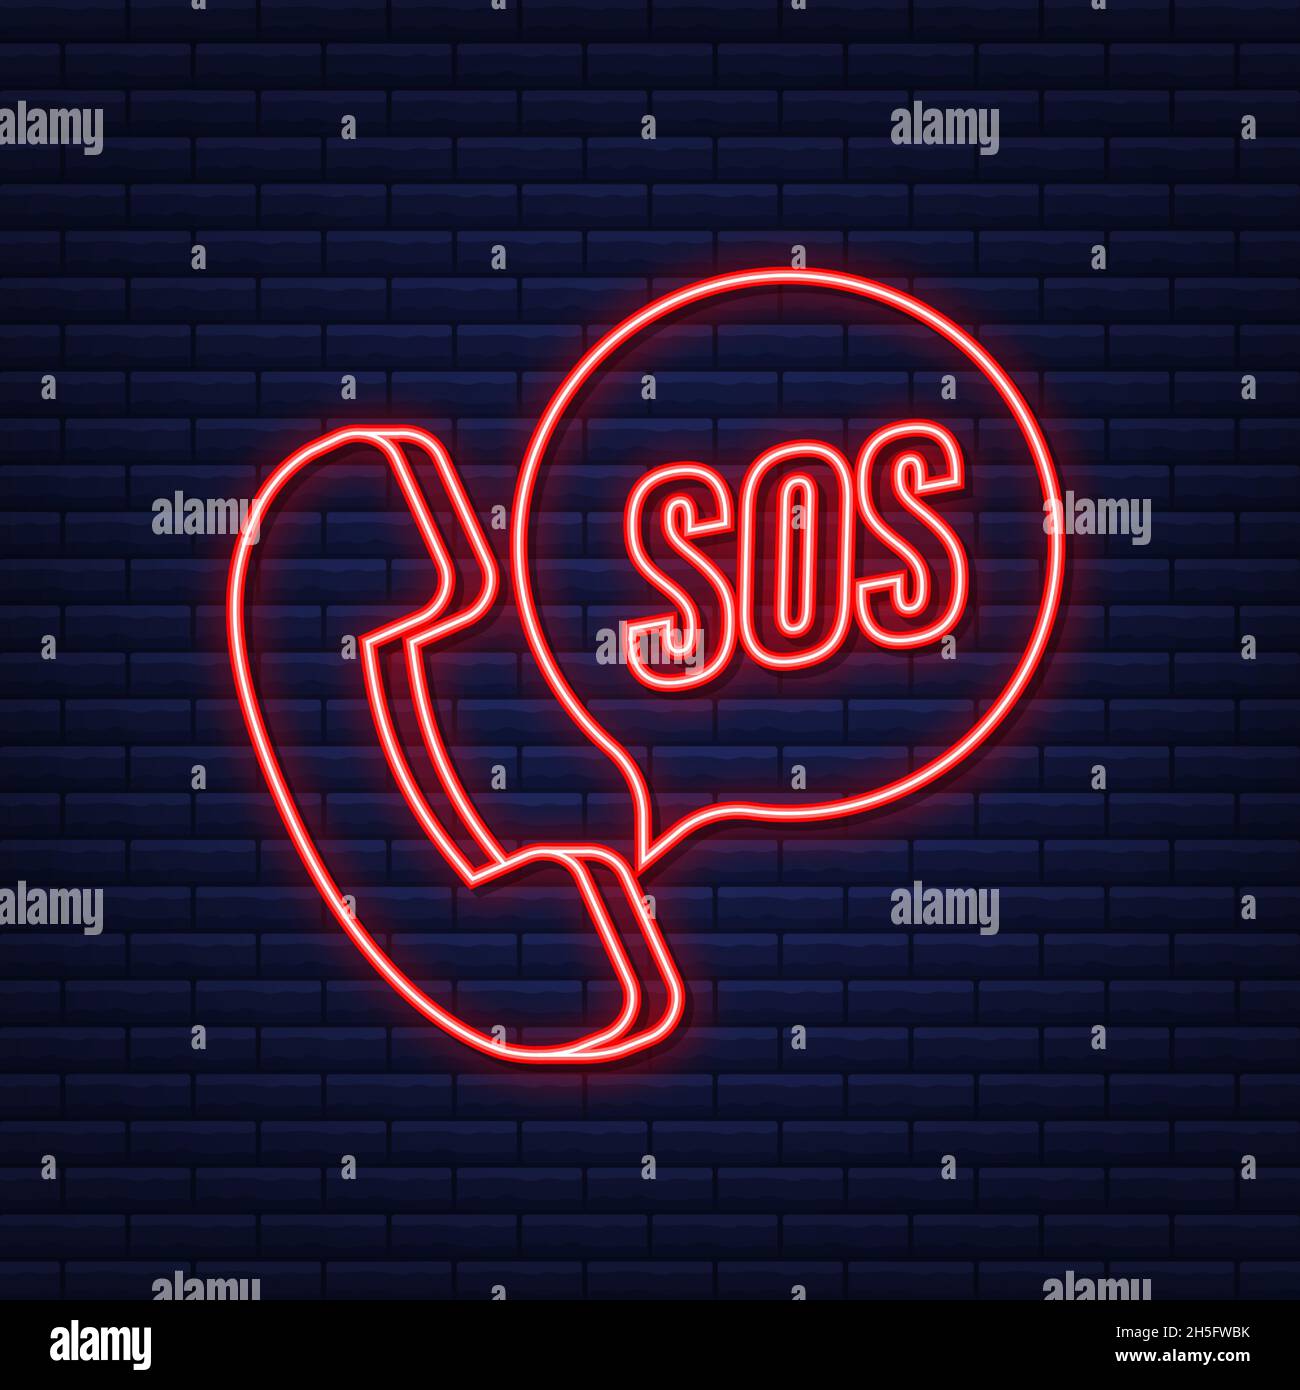 SOS emergency call. 911 calling. A cry for help. Vector stock illustration. Stock Vector